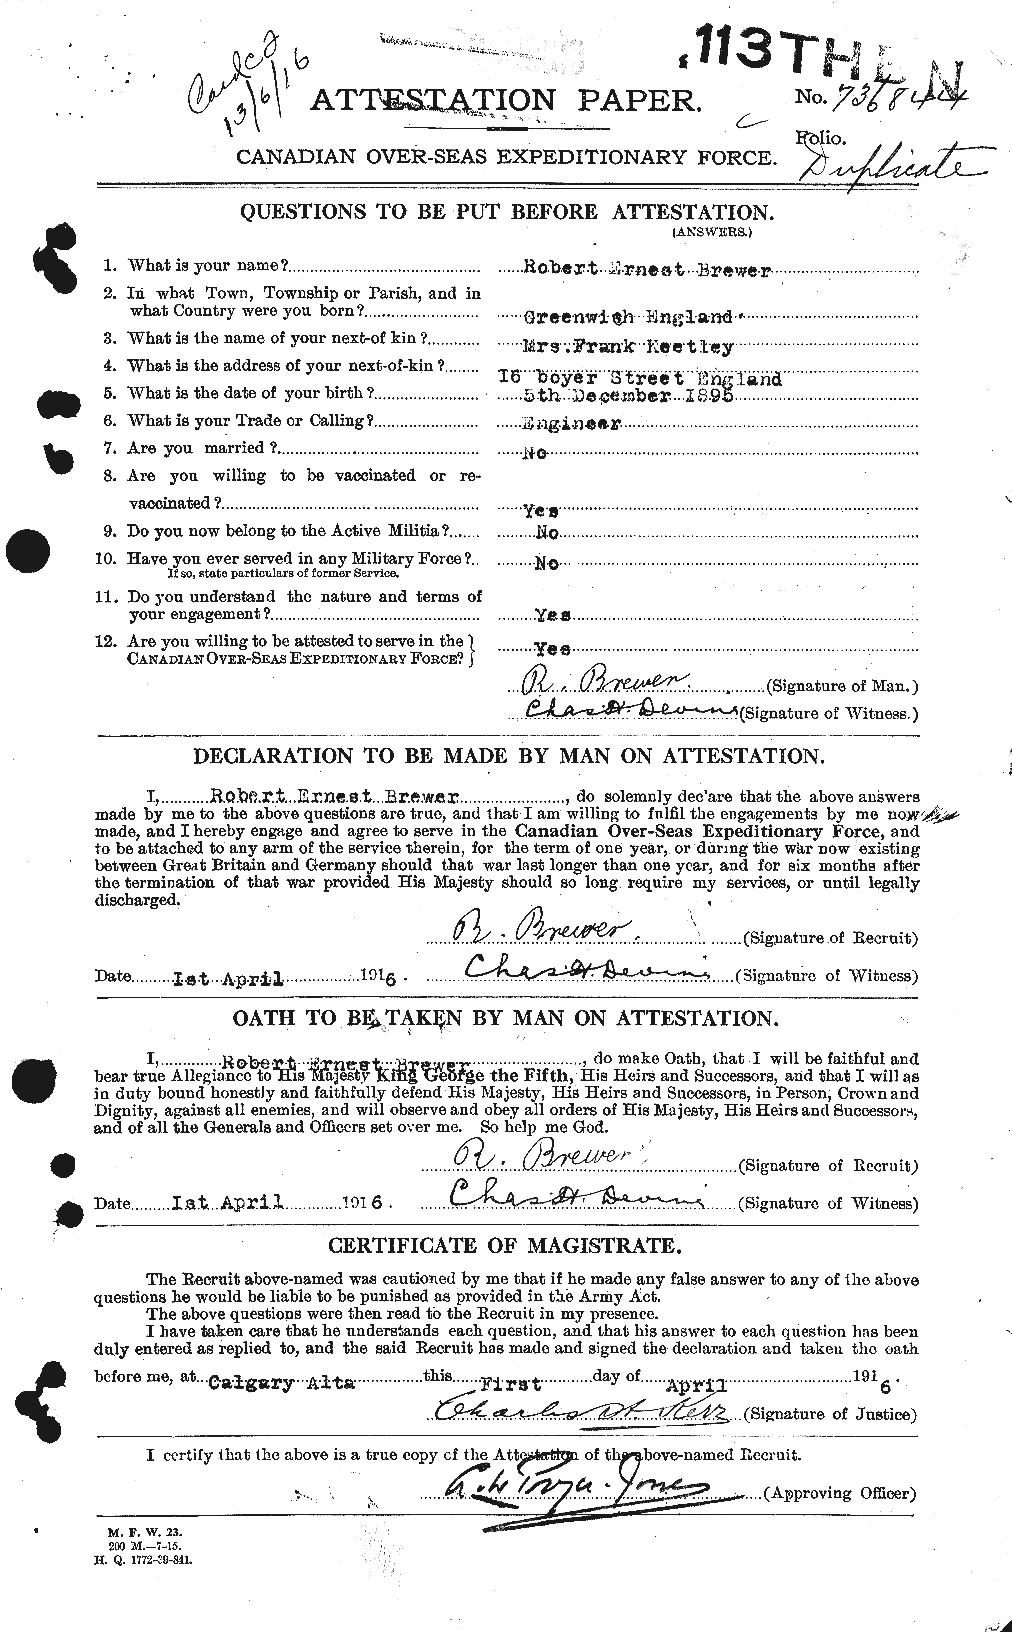 Personnel Records of the First World War - CEF 260796a